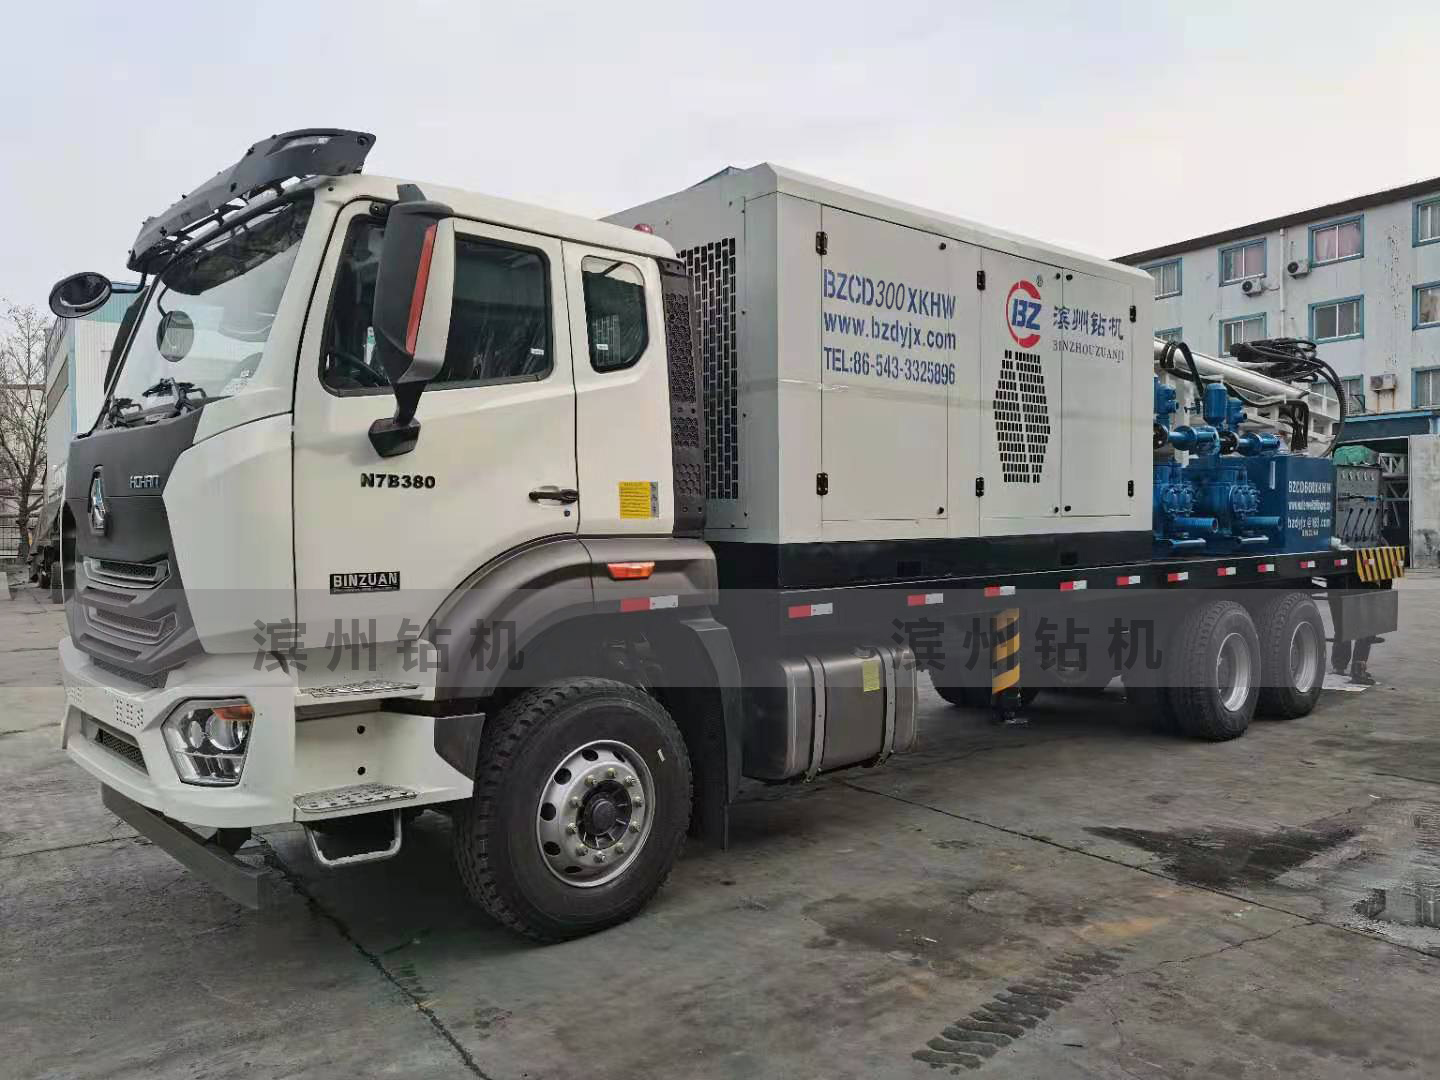  hydraulic drilling rig| multifunction drilling rig|truck mounted drilling rig